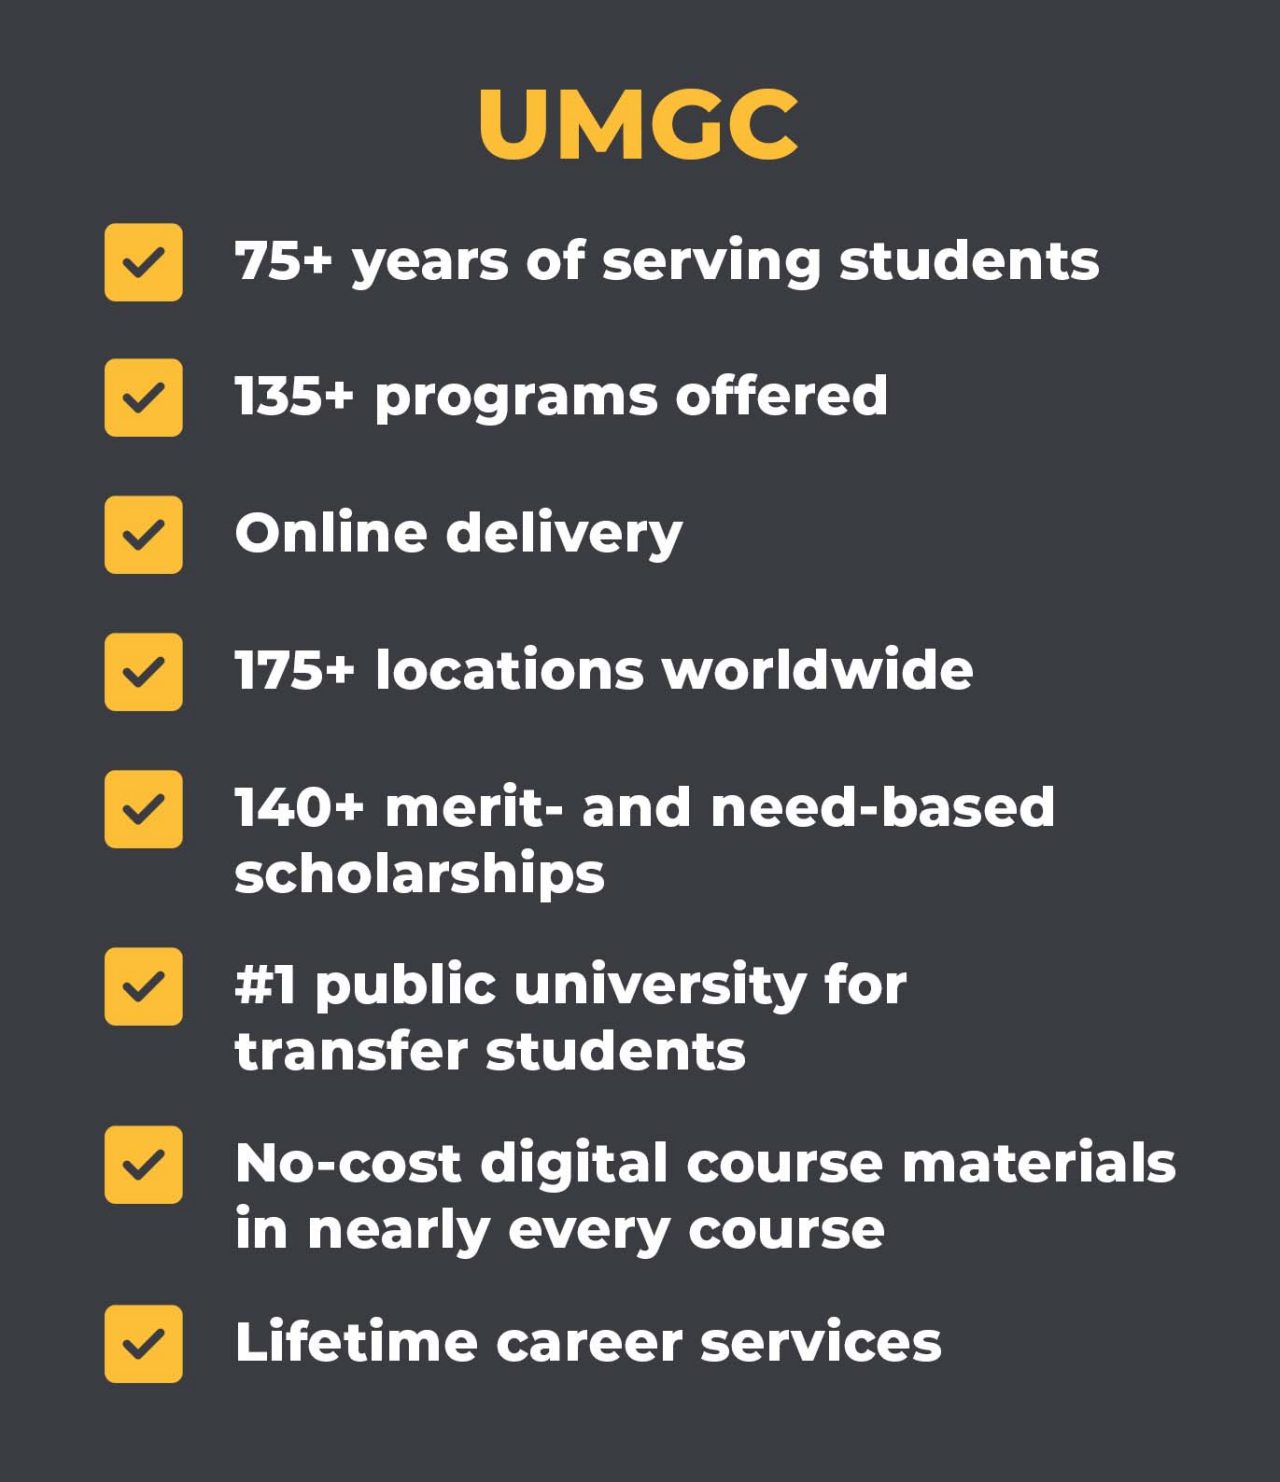 A checklist that reads, "UMGC: 75+ years of serving students; 135+ programs offered; Online delivery; 175+ location worldwide; 140+ merit- and need-based scholarships; #1 public university for transfer students; No-cost digital course materials in nearly every course; Lifetime career services."